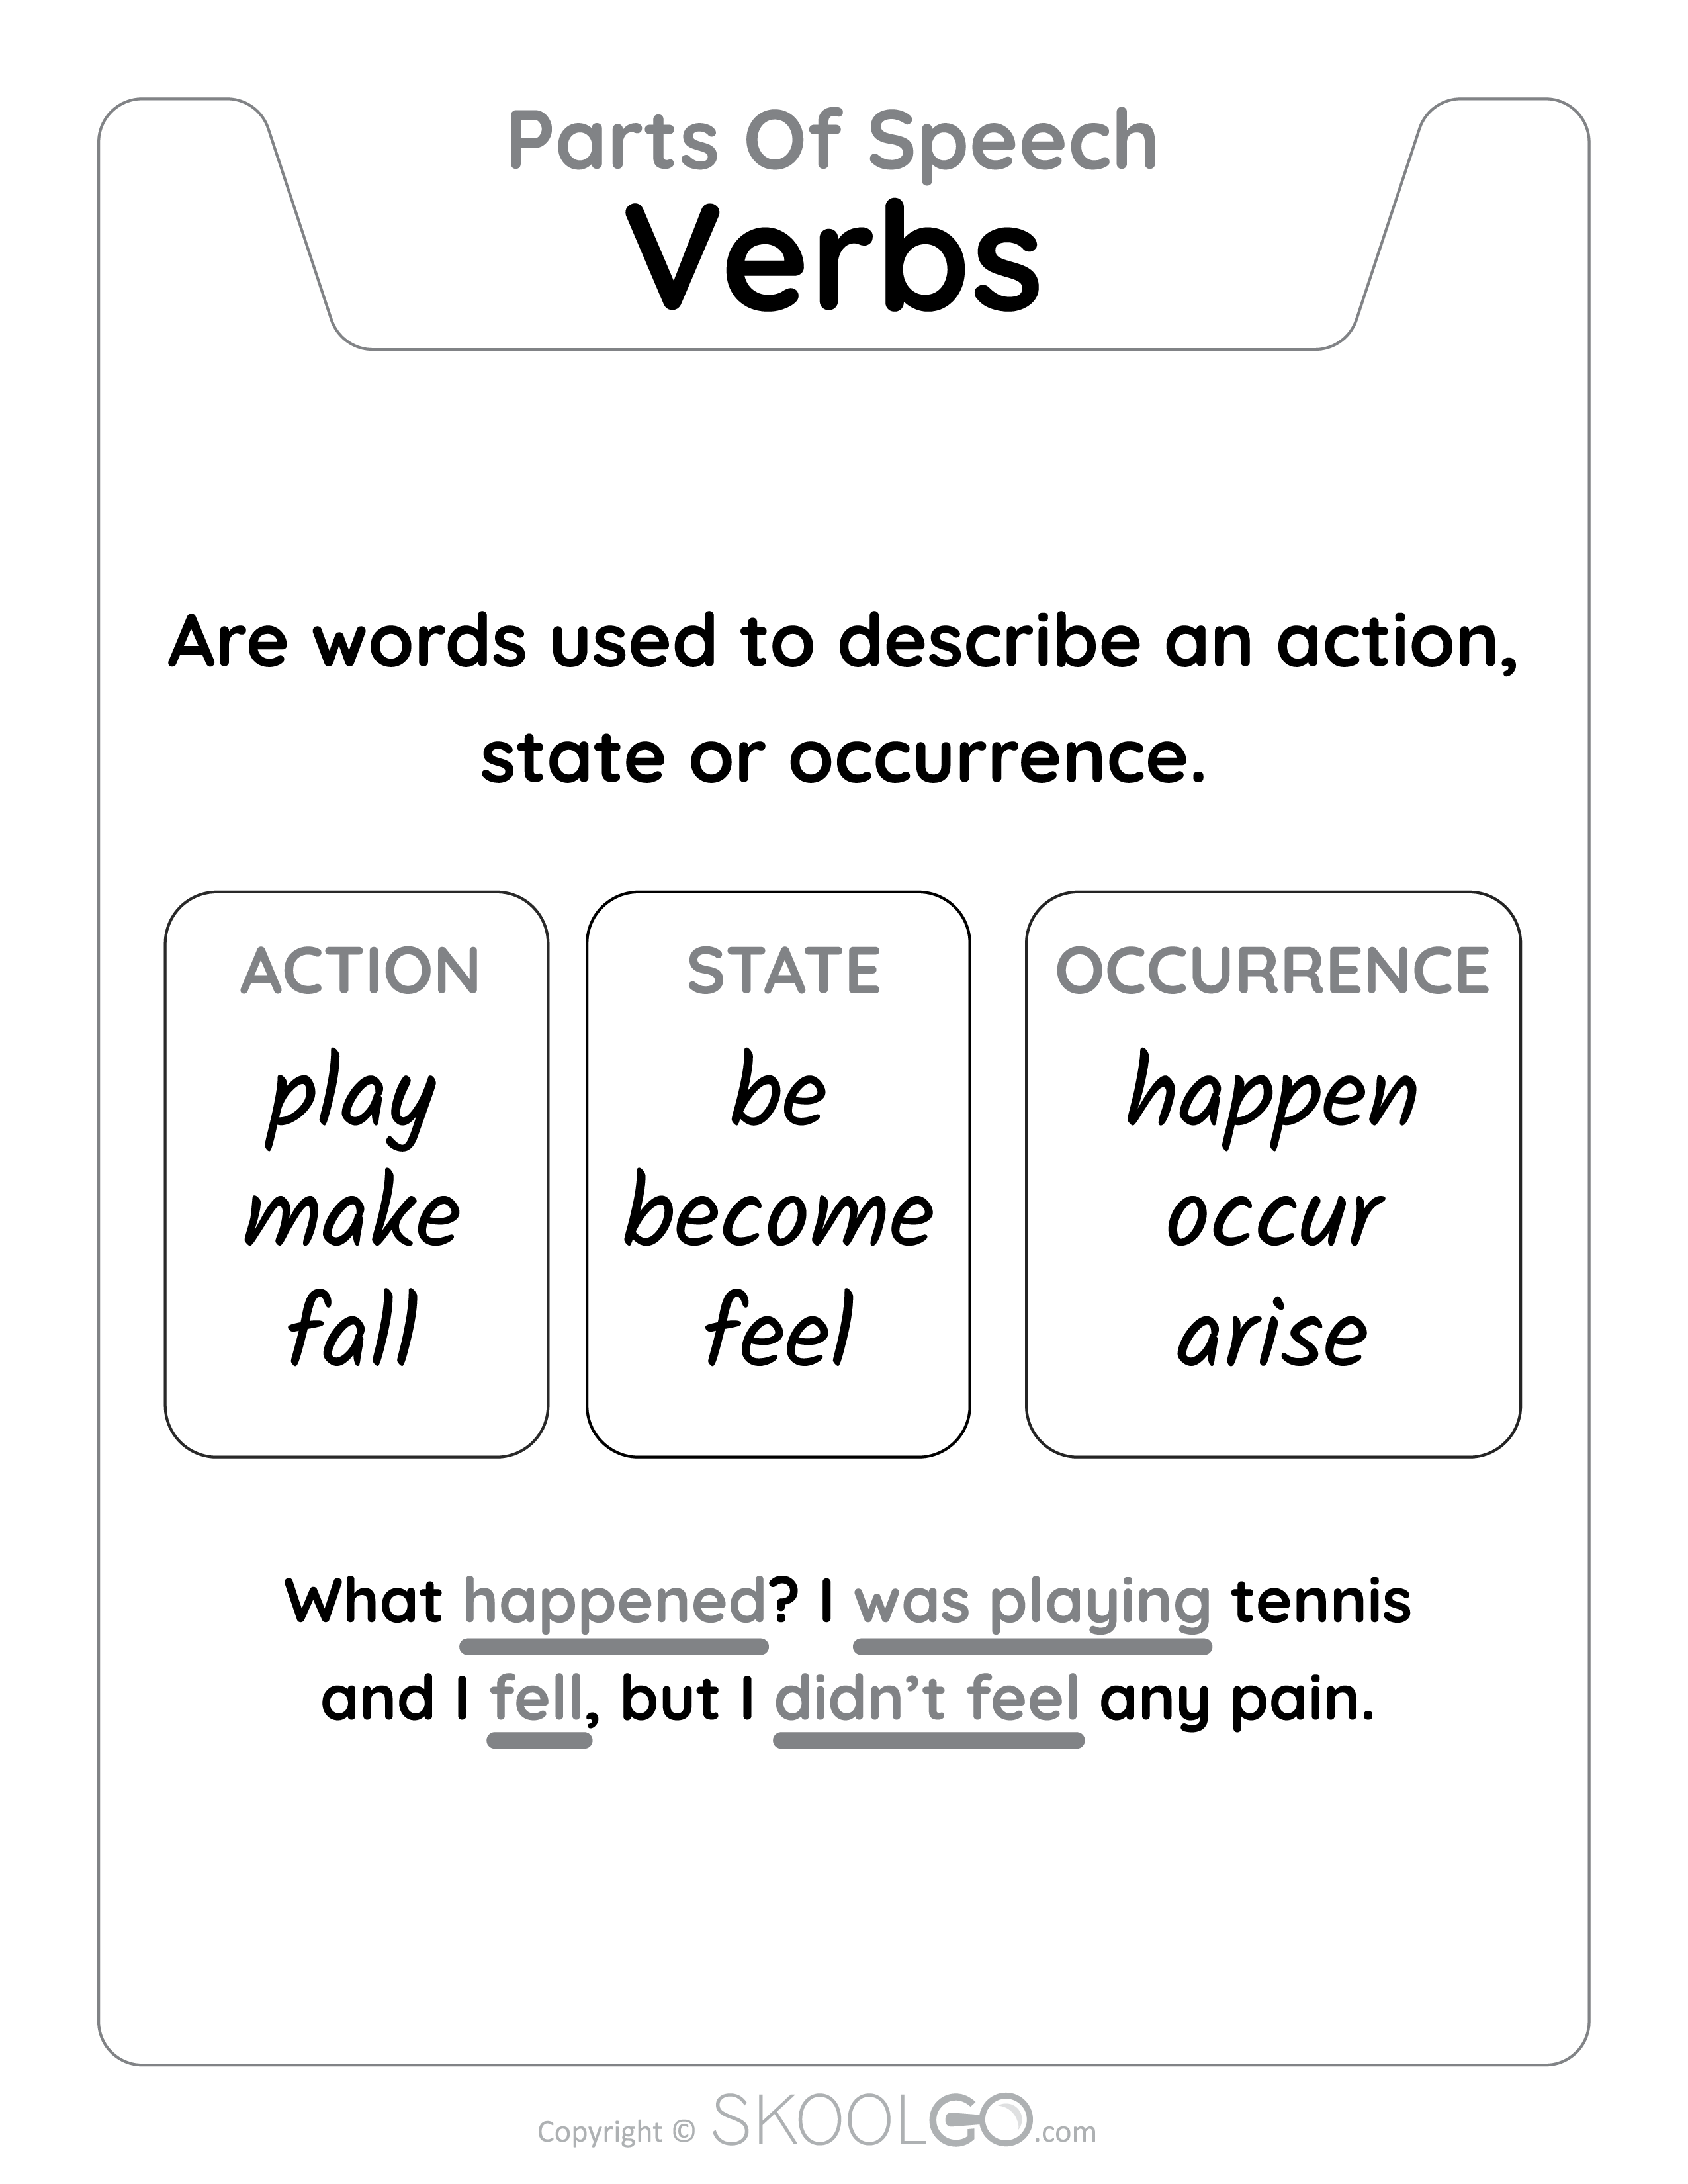 Verbs - Parts Of Speech - Free Learning Classroom Poster